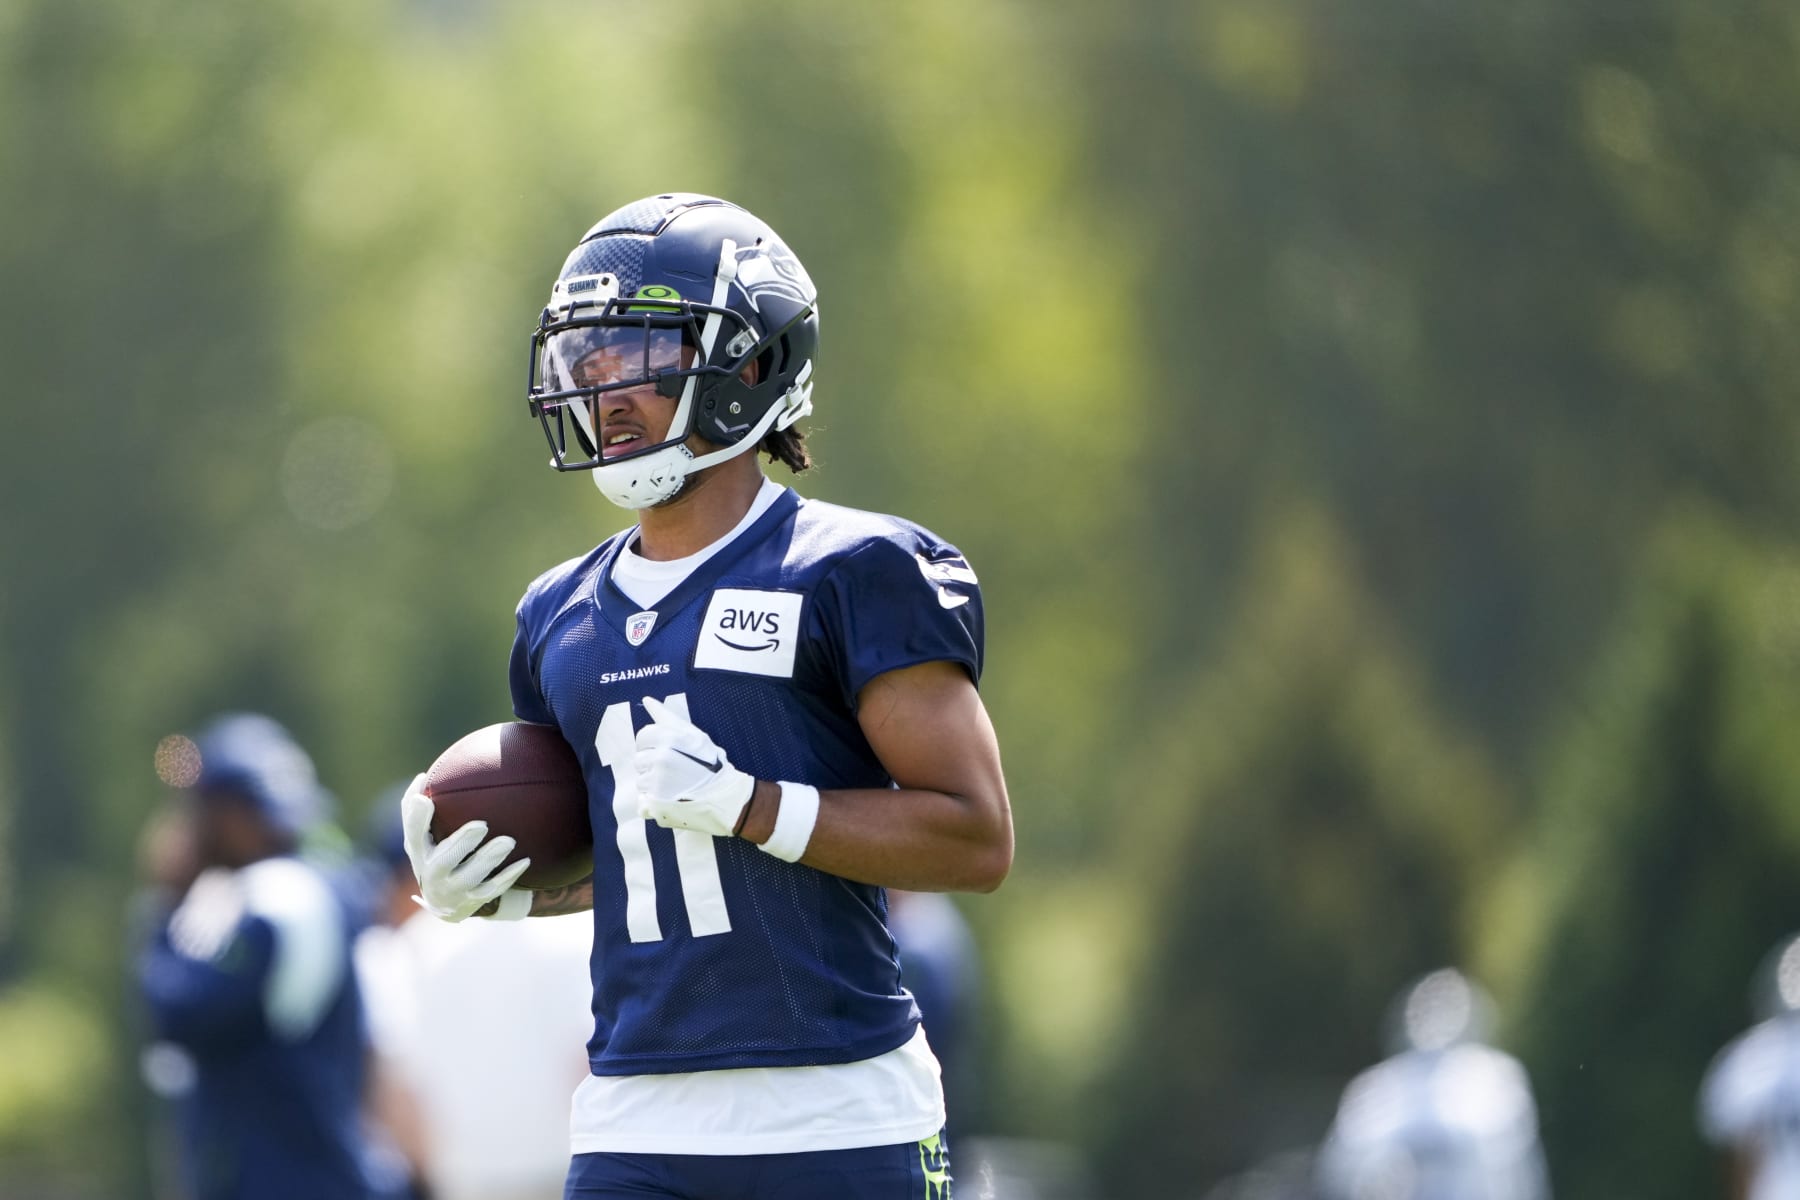 Watch: Seahawks' Smith displays leadership with rookie WR